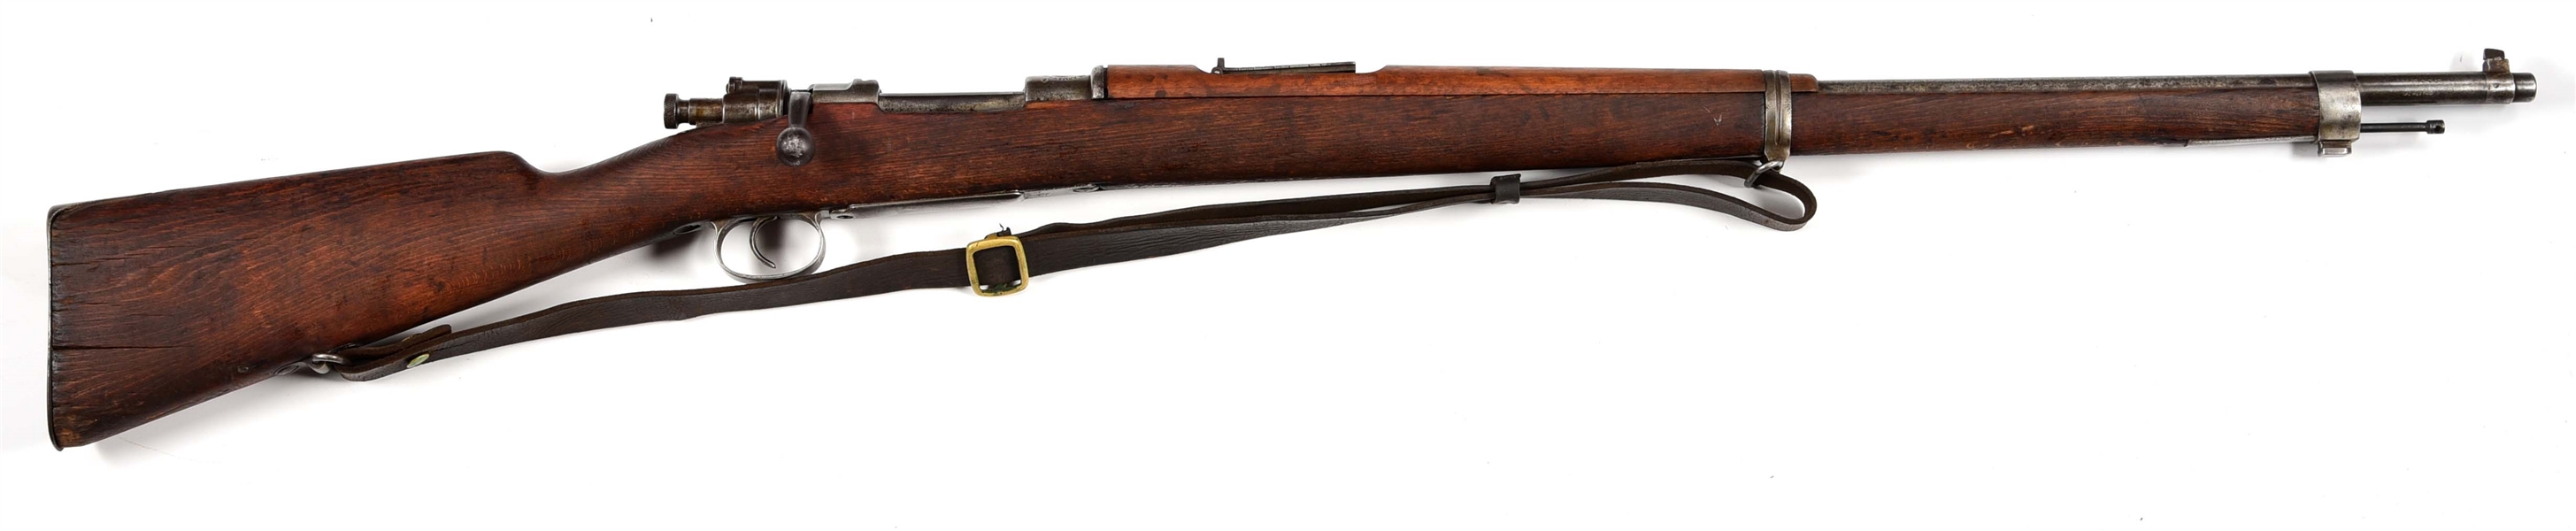 (C) MEXICAN CONTRACT 1910 MAUSER BOLT ACTION RIFLE.